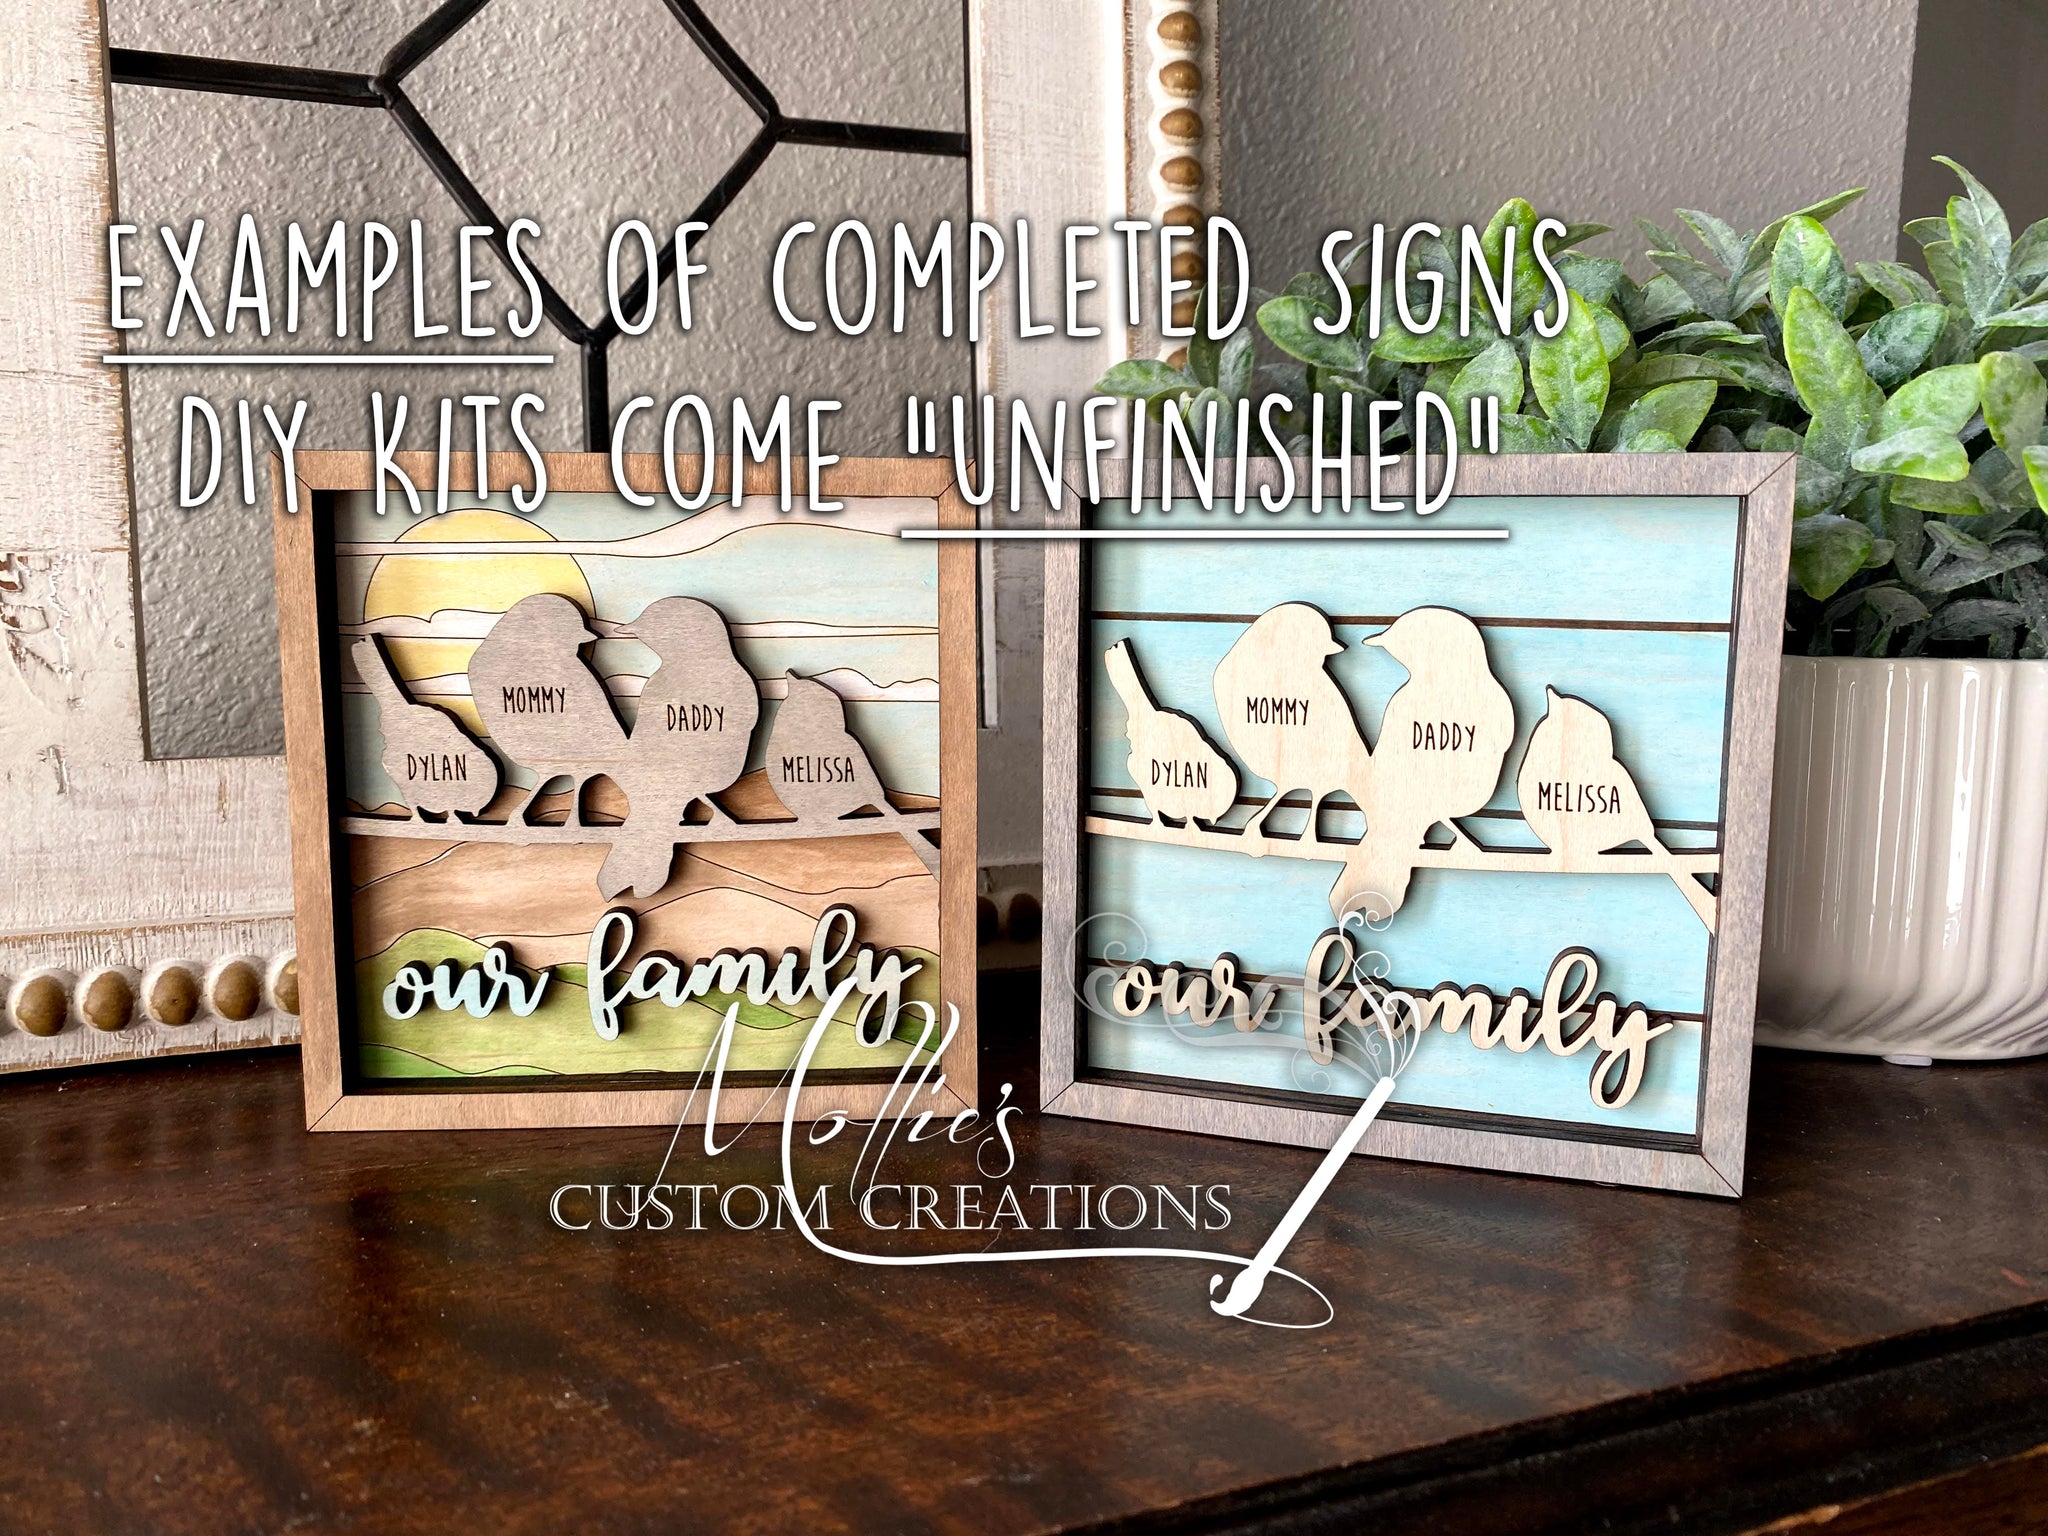 Bird Family Sign DIY Paint Kit, Personalized with Names